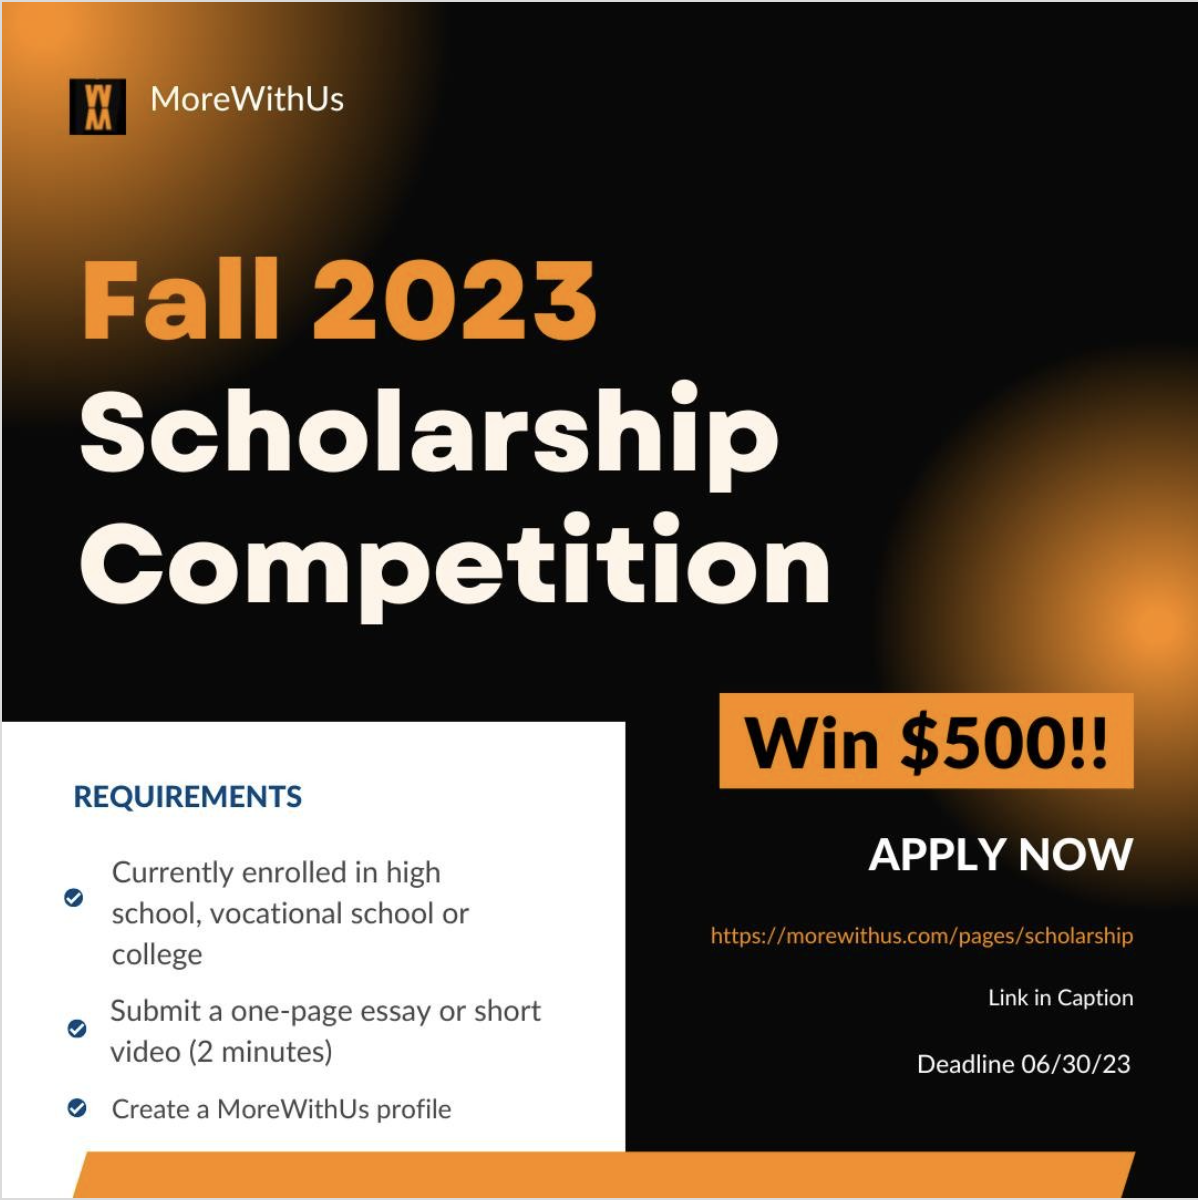 MoreWithUs Fall 2023 Scholarship available University of Maryland